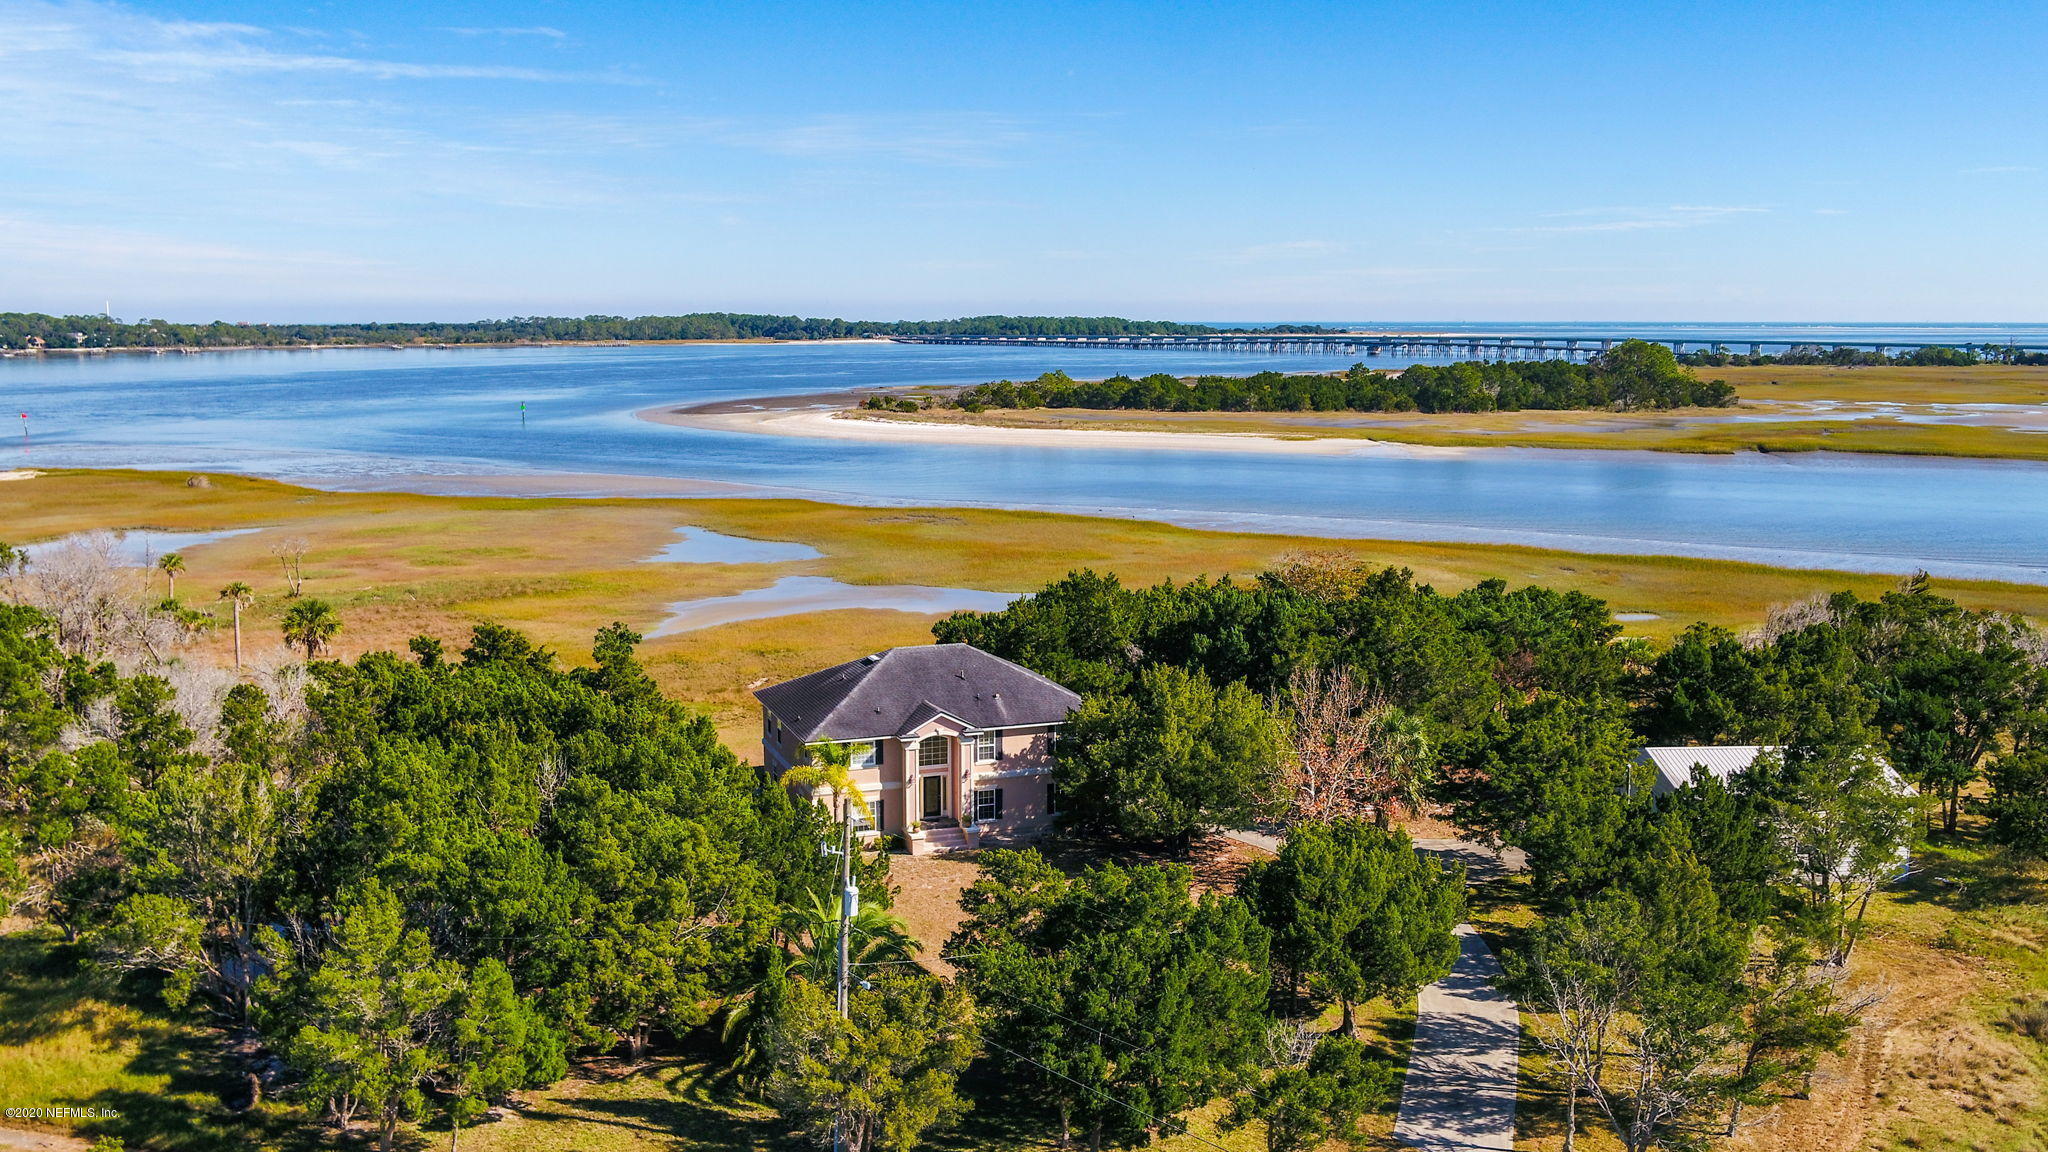 2.3 of Waterfront Acres